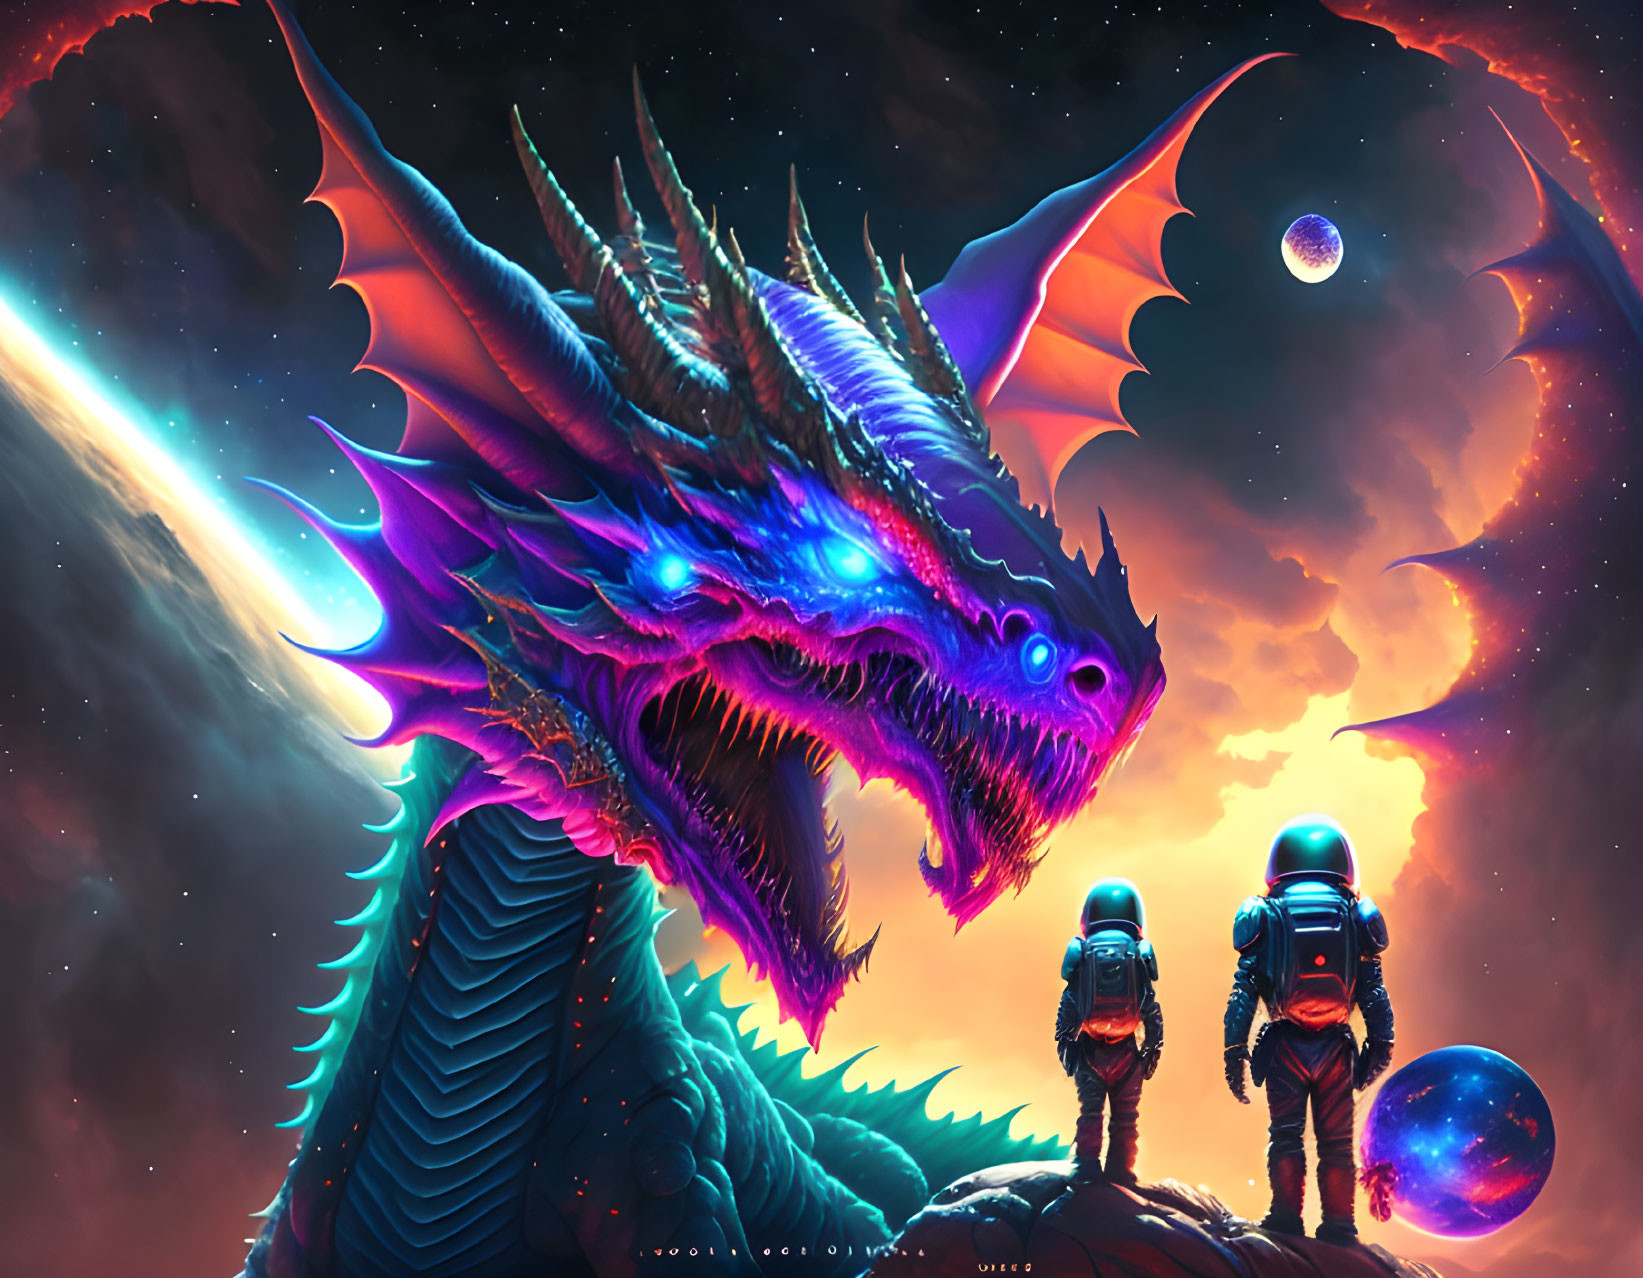 meeting the space dragon